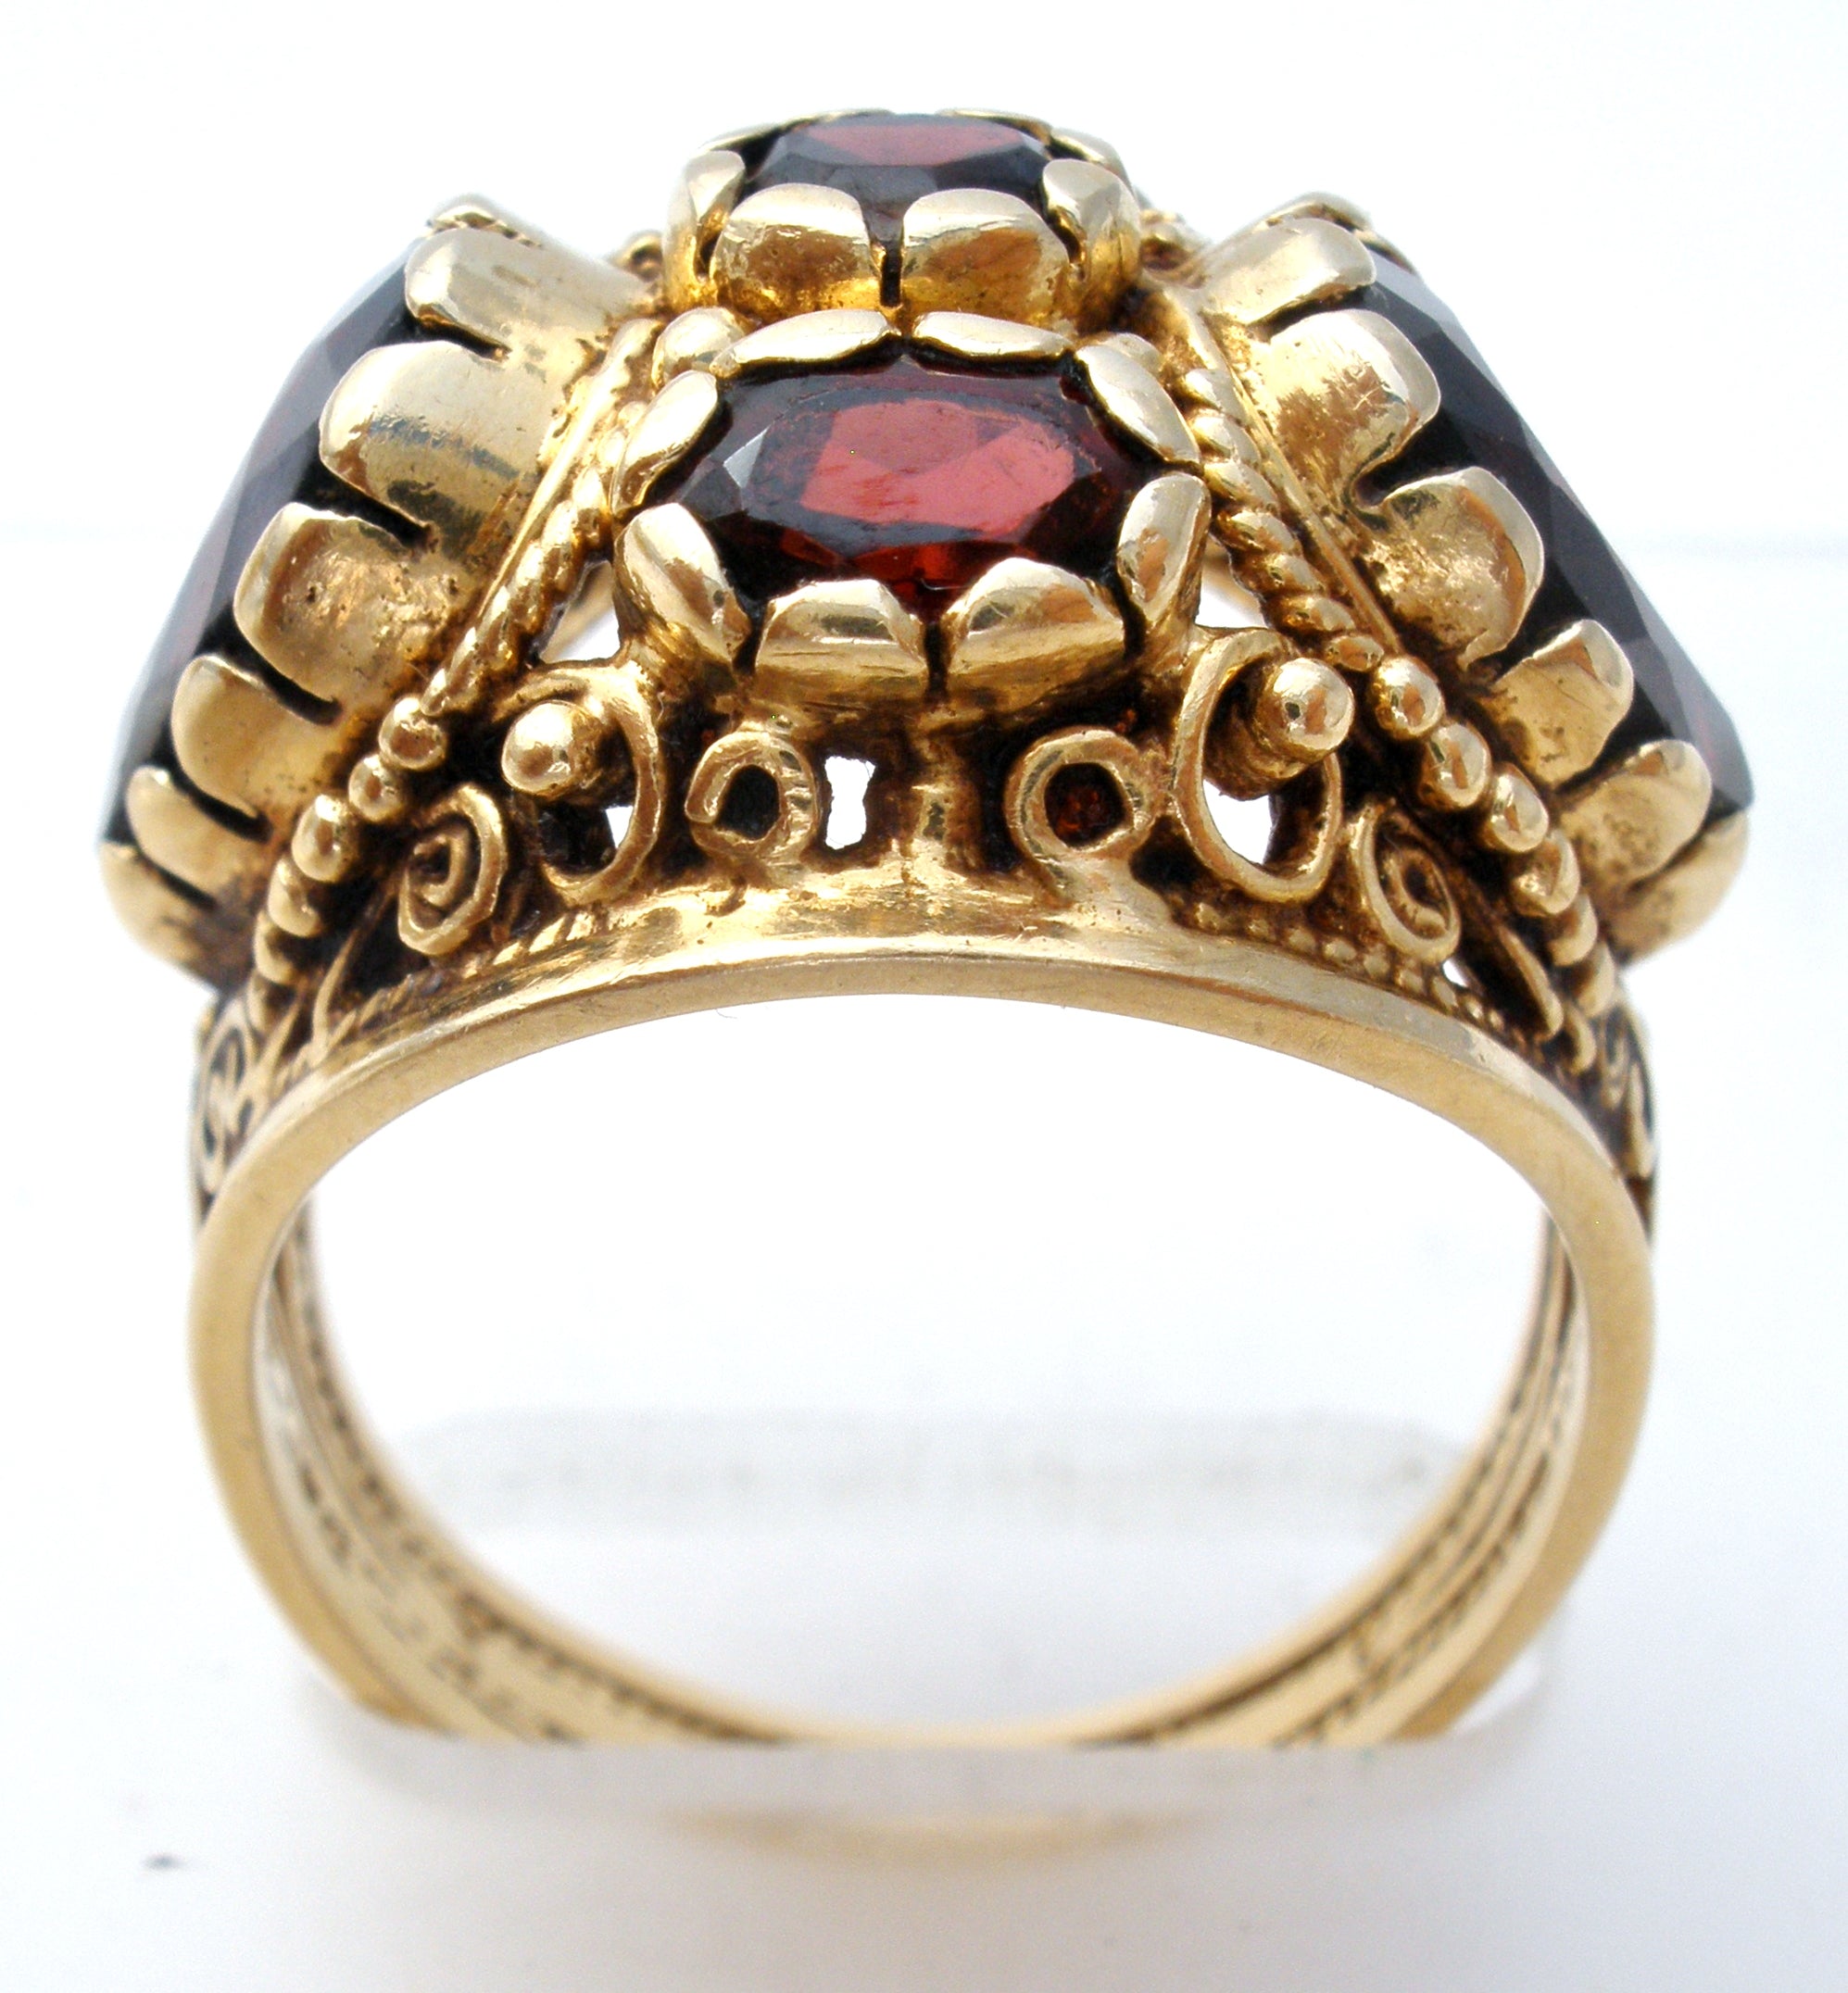 14K Gold Garnet Ring Size 8.5 Vintage – The Jewelry Lady's Store